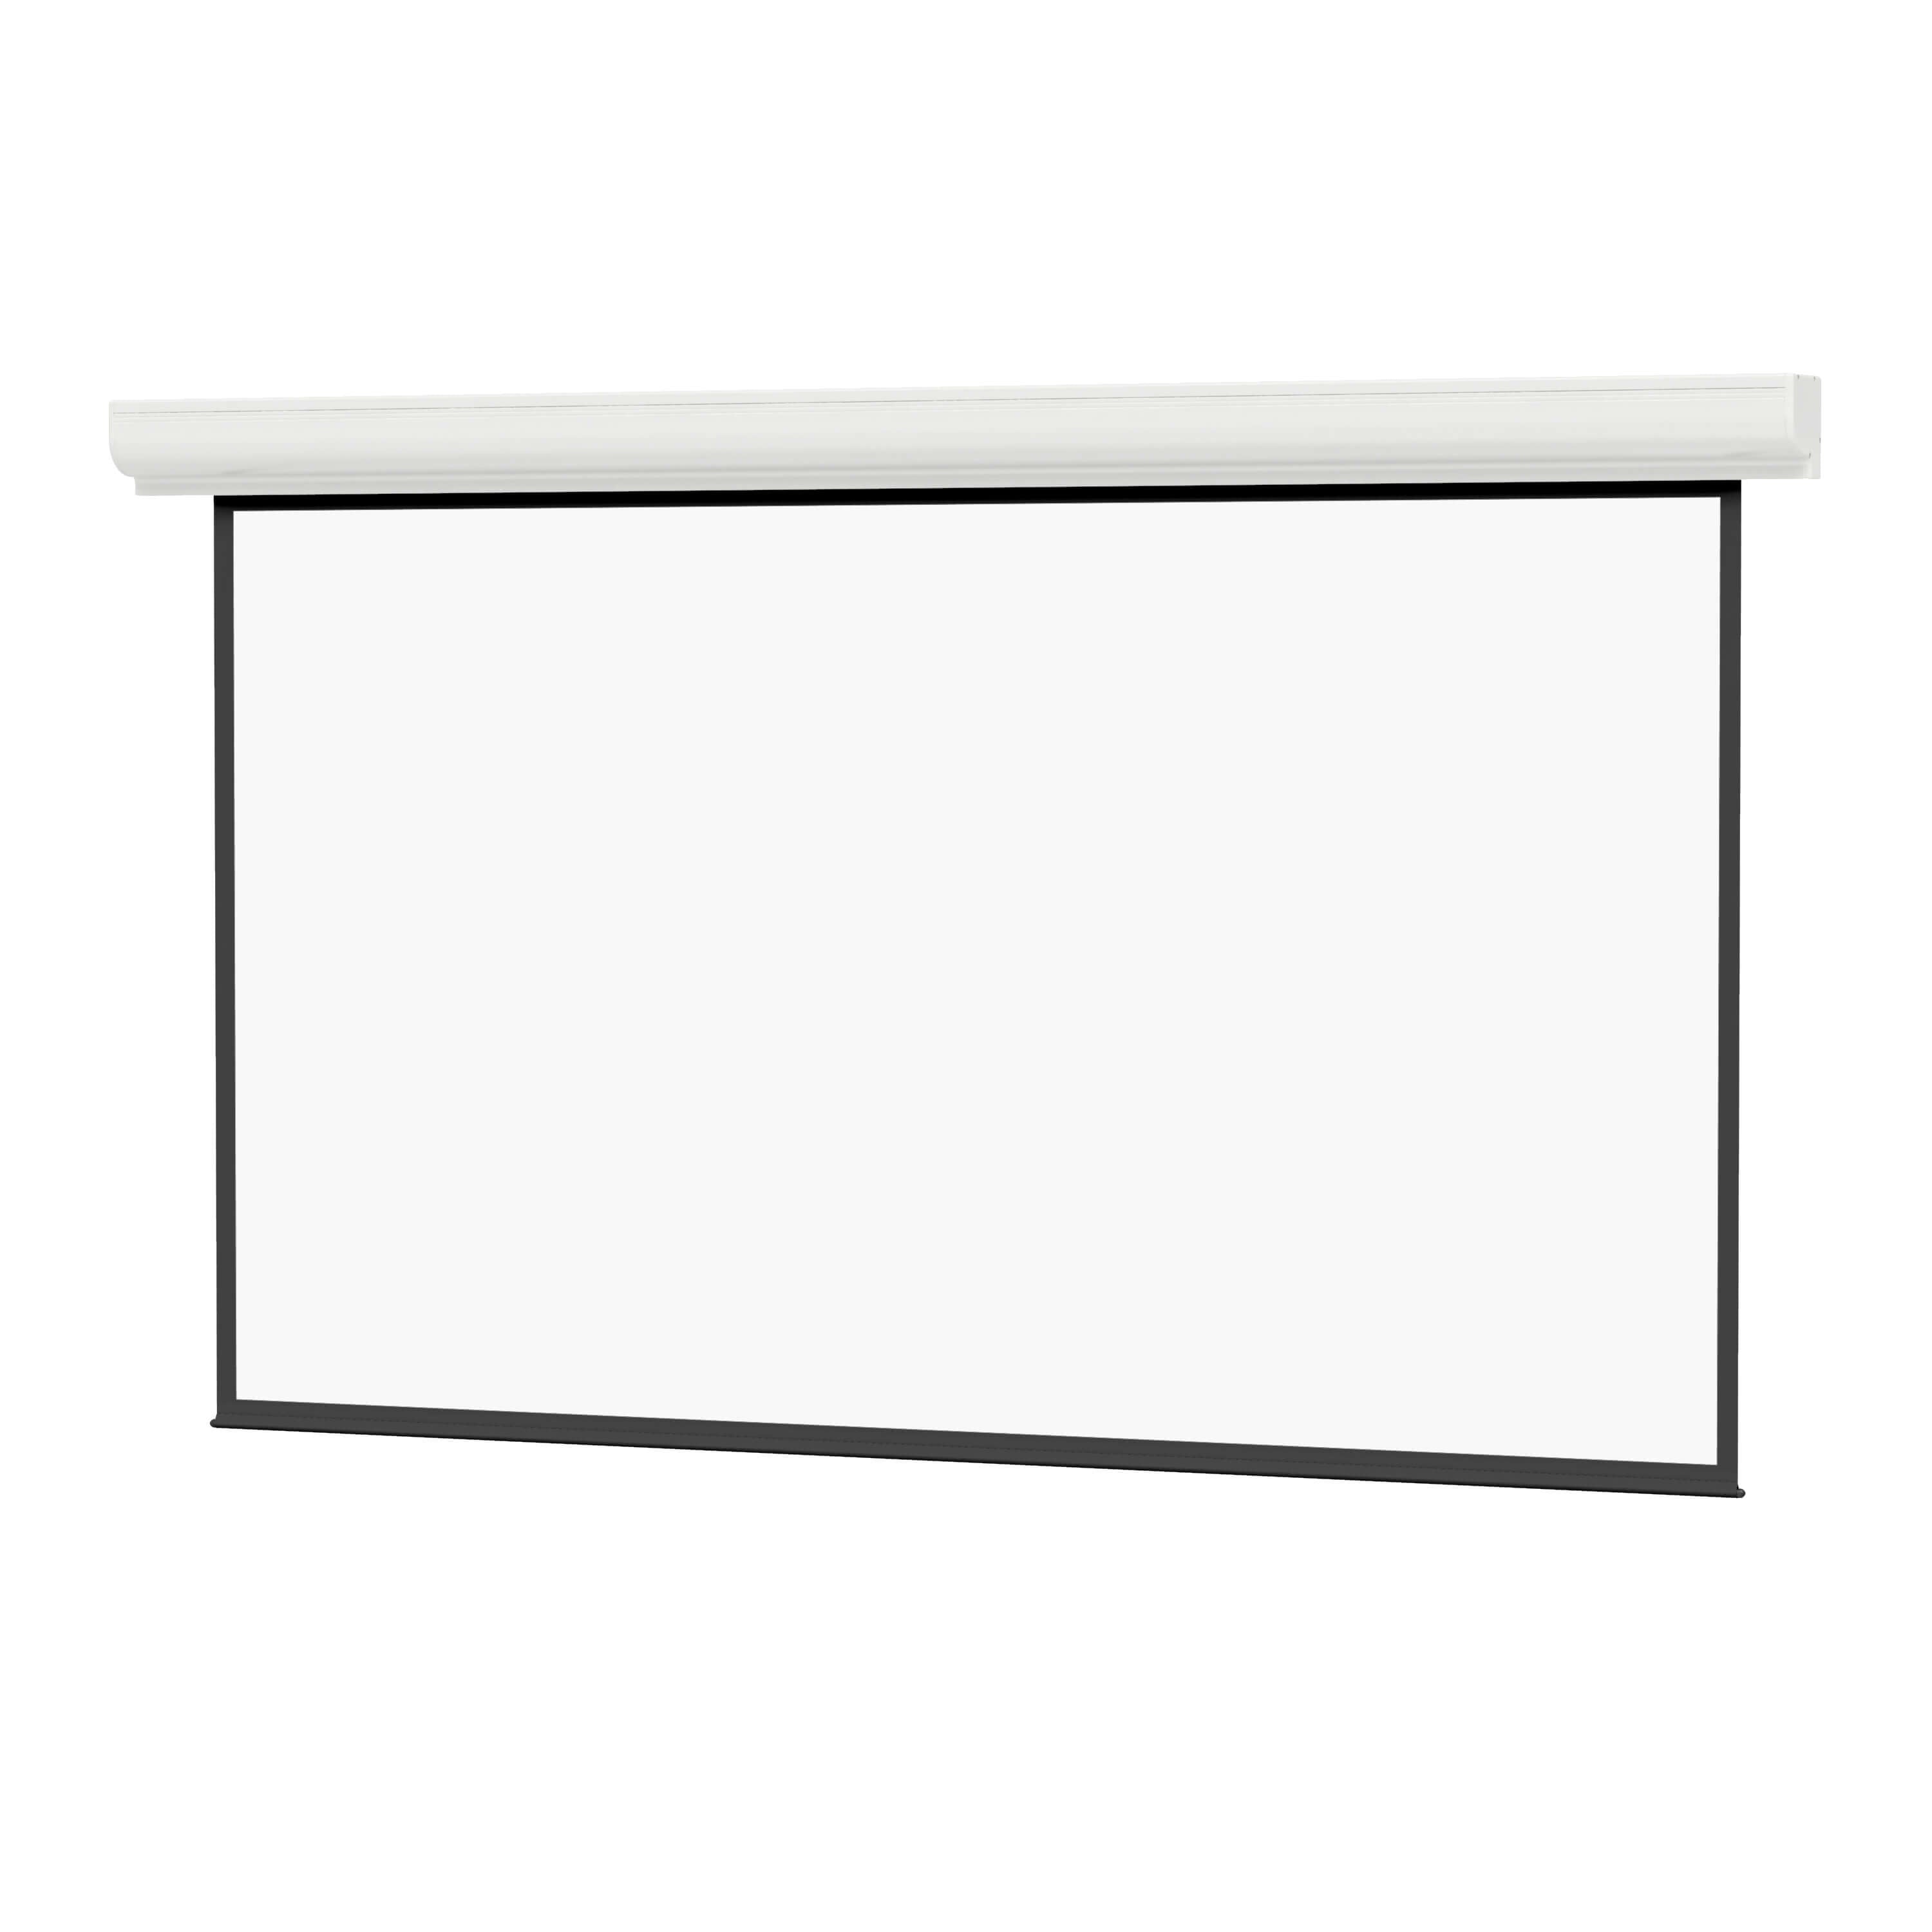 Da-Lite Contour Electrol - Wall or Ceiling Mounted Electric Screen